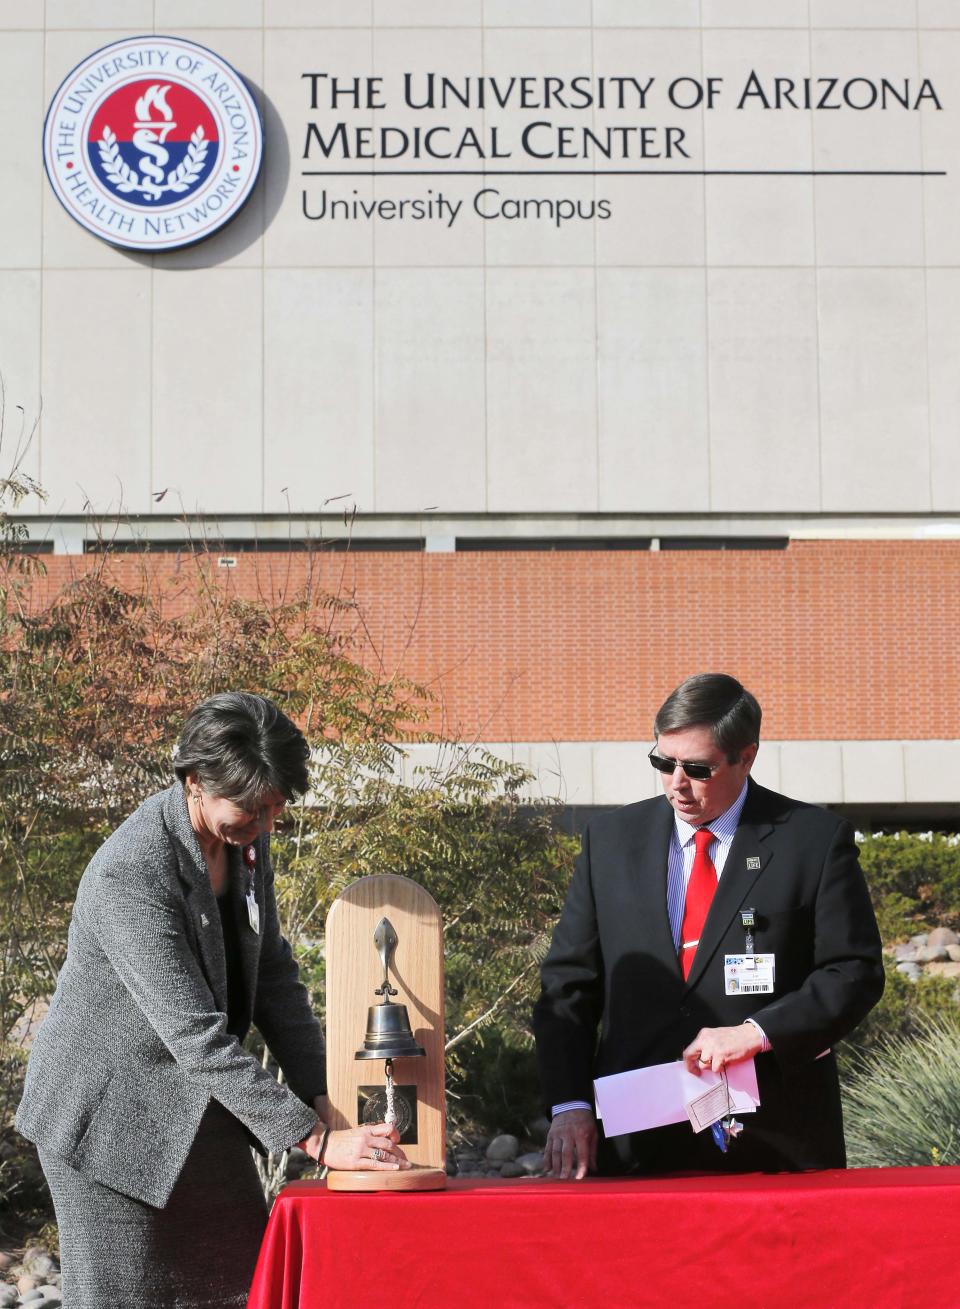 Karen Mlawsky, CEO of the University of Arizona Medical Center Hospital Division, rings a bell 19 times in honor of the 19 shooting victims during a remembrance ceremony on the third anniversary of the Tucson shootings, Wednesday, Jan. 8, 2014, in Tucson, Ariz. as Chaplin Joe Fitzgerald looks on. Six people were killed and 13 wounded, including U.S. Rep. Gabrielle Giffords, D-Ariz., in the shooting rampage at a community event hosted by Giffords in 2011. Jared Lee Loughner was sentenced in November 2012 to seven consecutive life sentences, plus 140 years, after he pleaded guilty to 19 federal charges in the shooting. (AP Photo/Matt York)